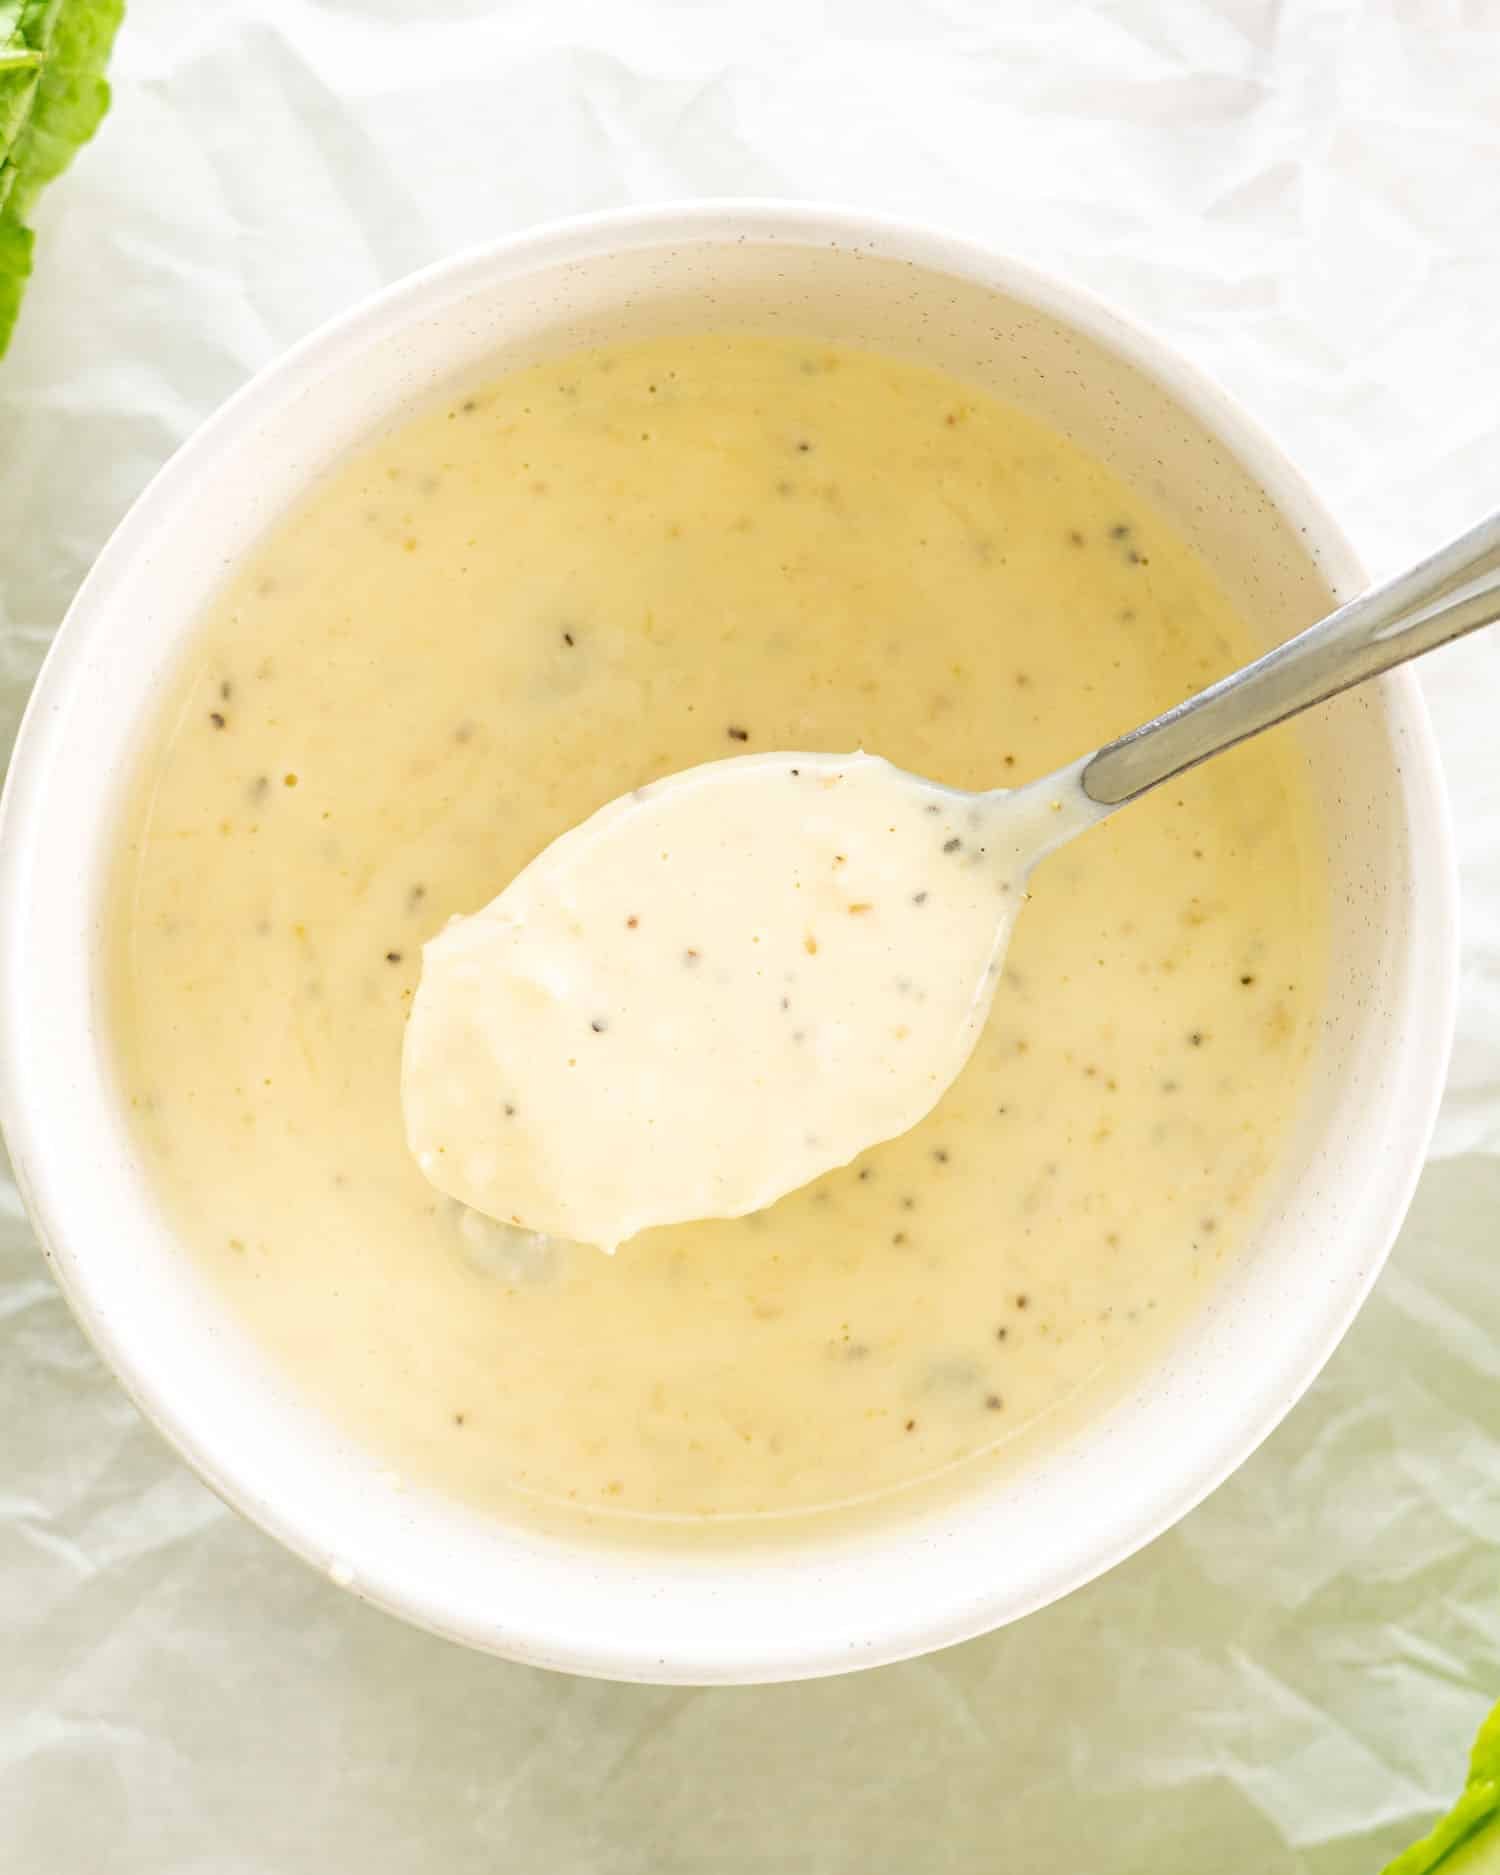 freshly made caesar salad dressing in a bowl with a teaspoon inside.